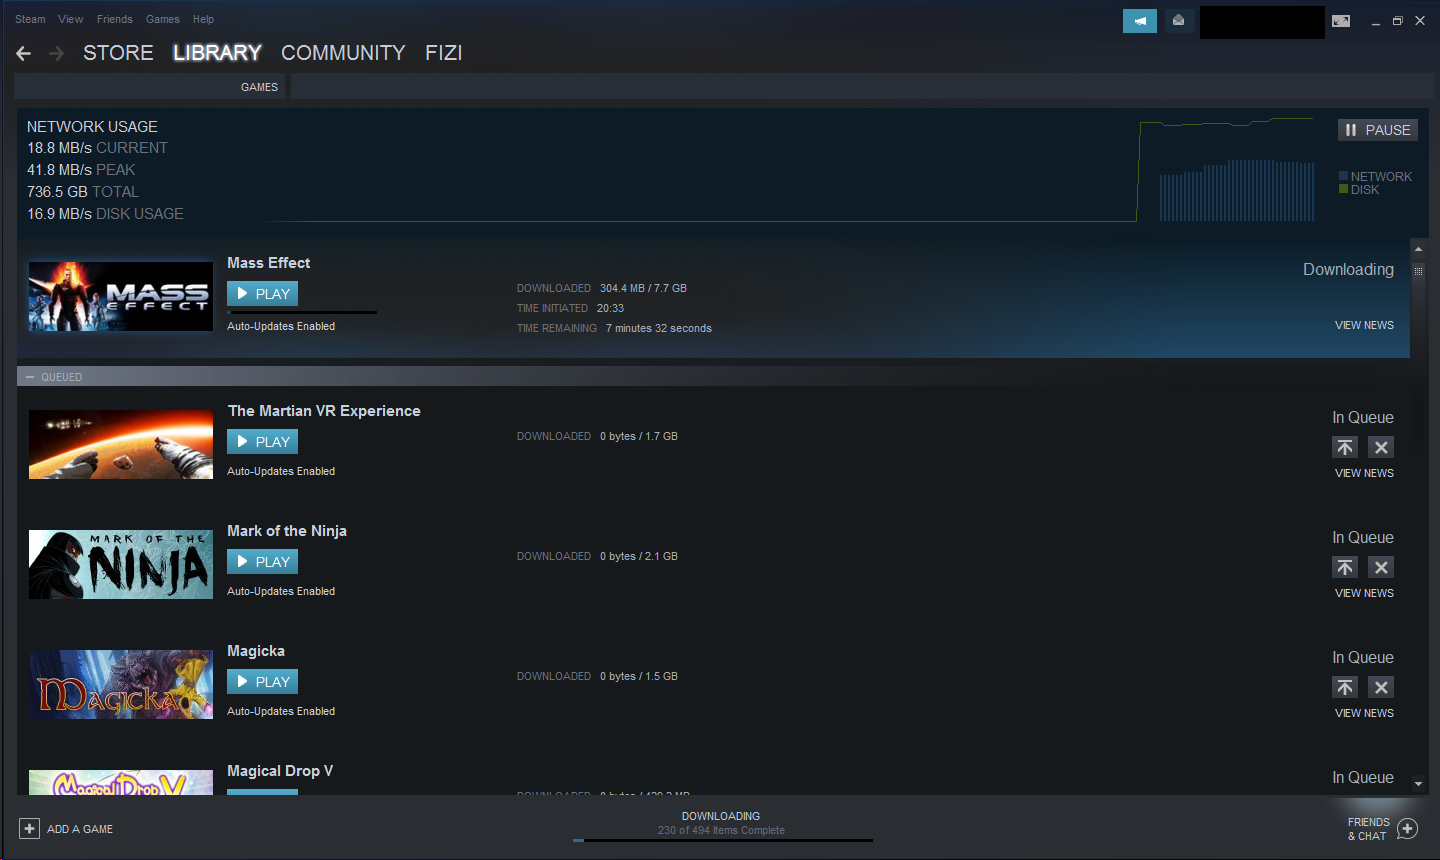 How To Download Games From Steam, Download Games on Steam